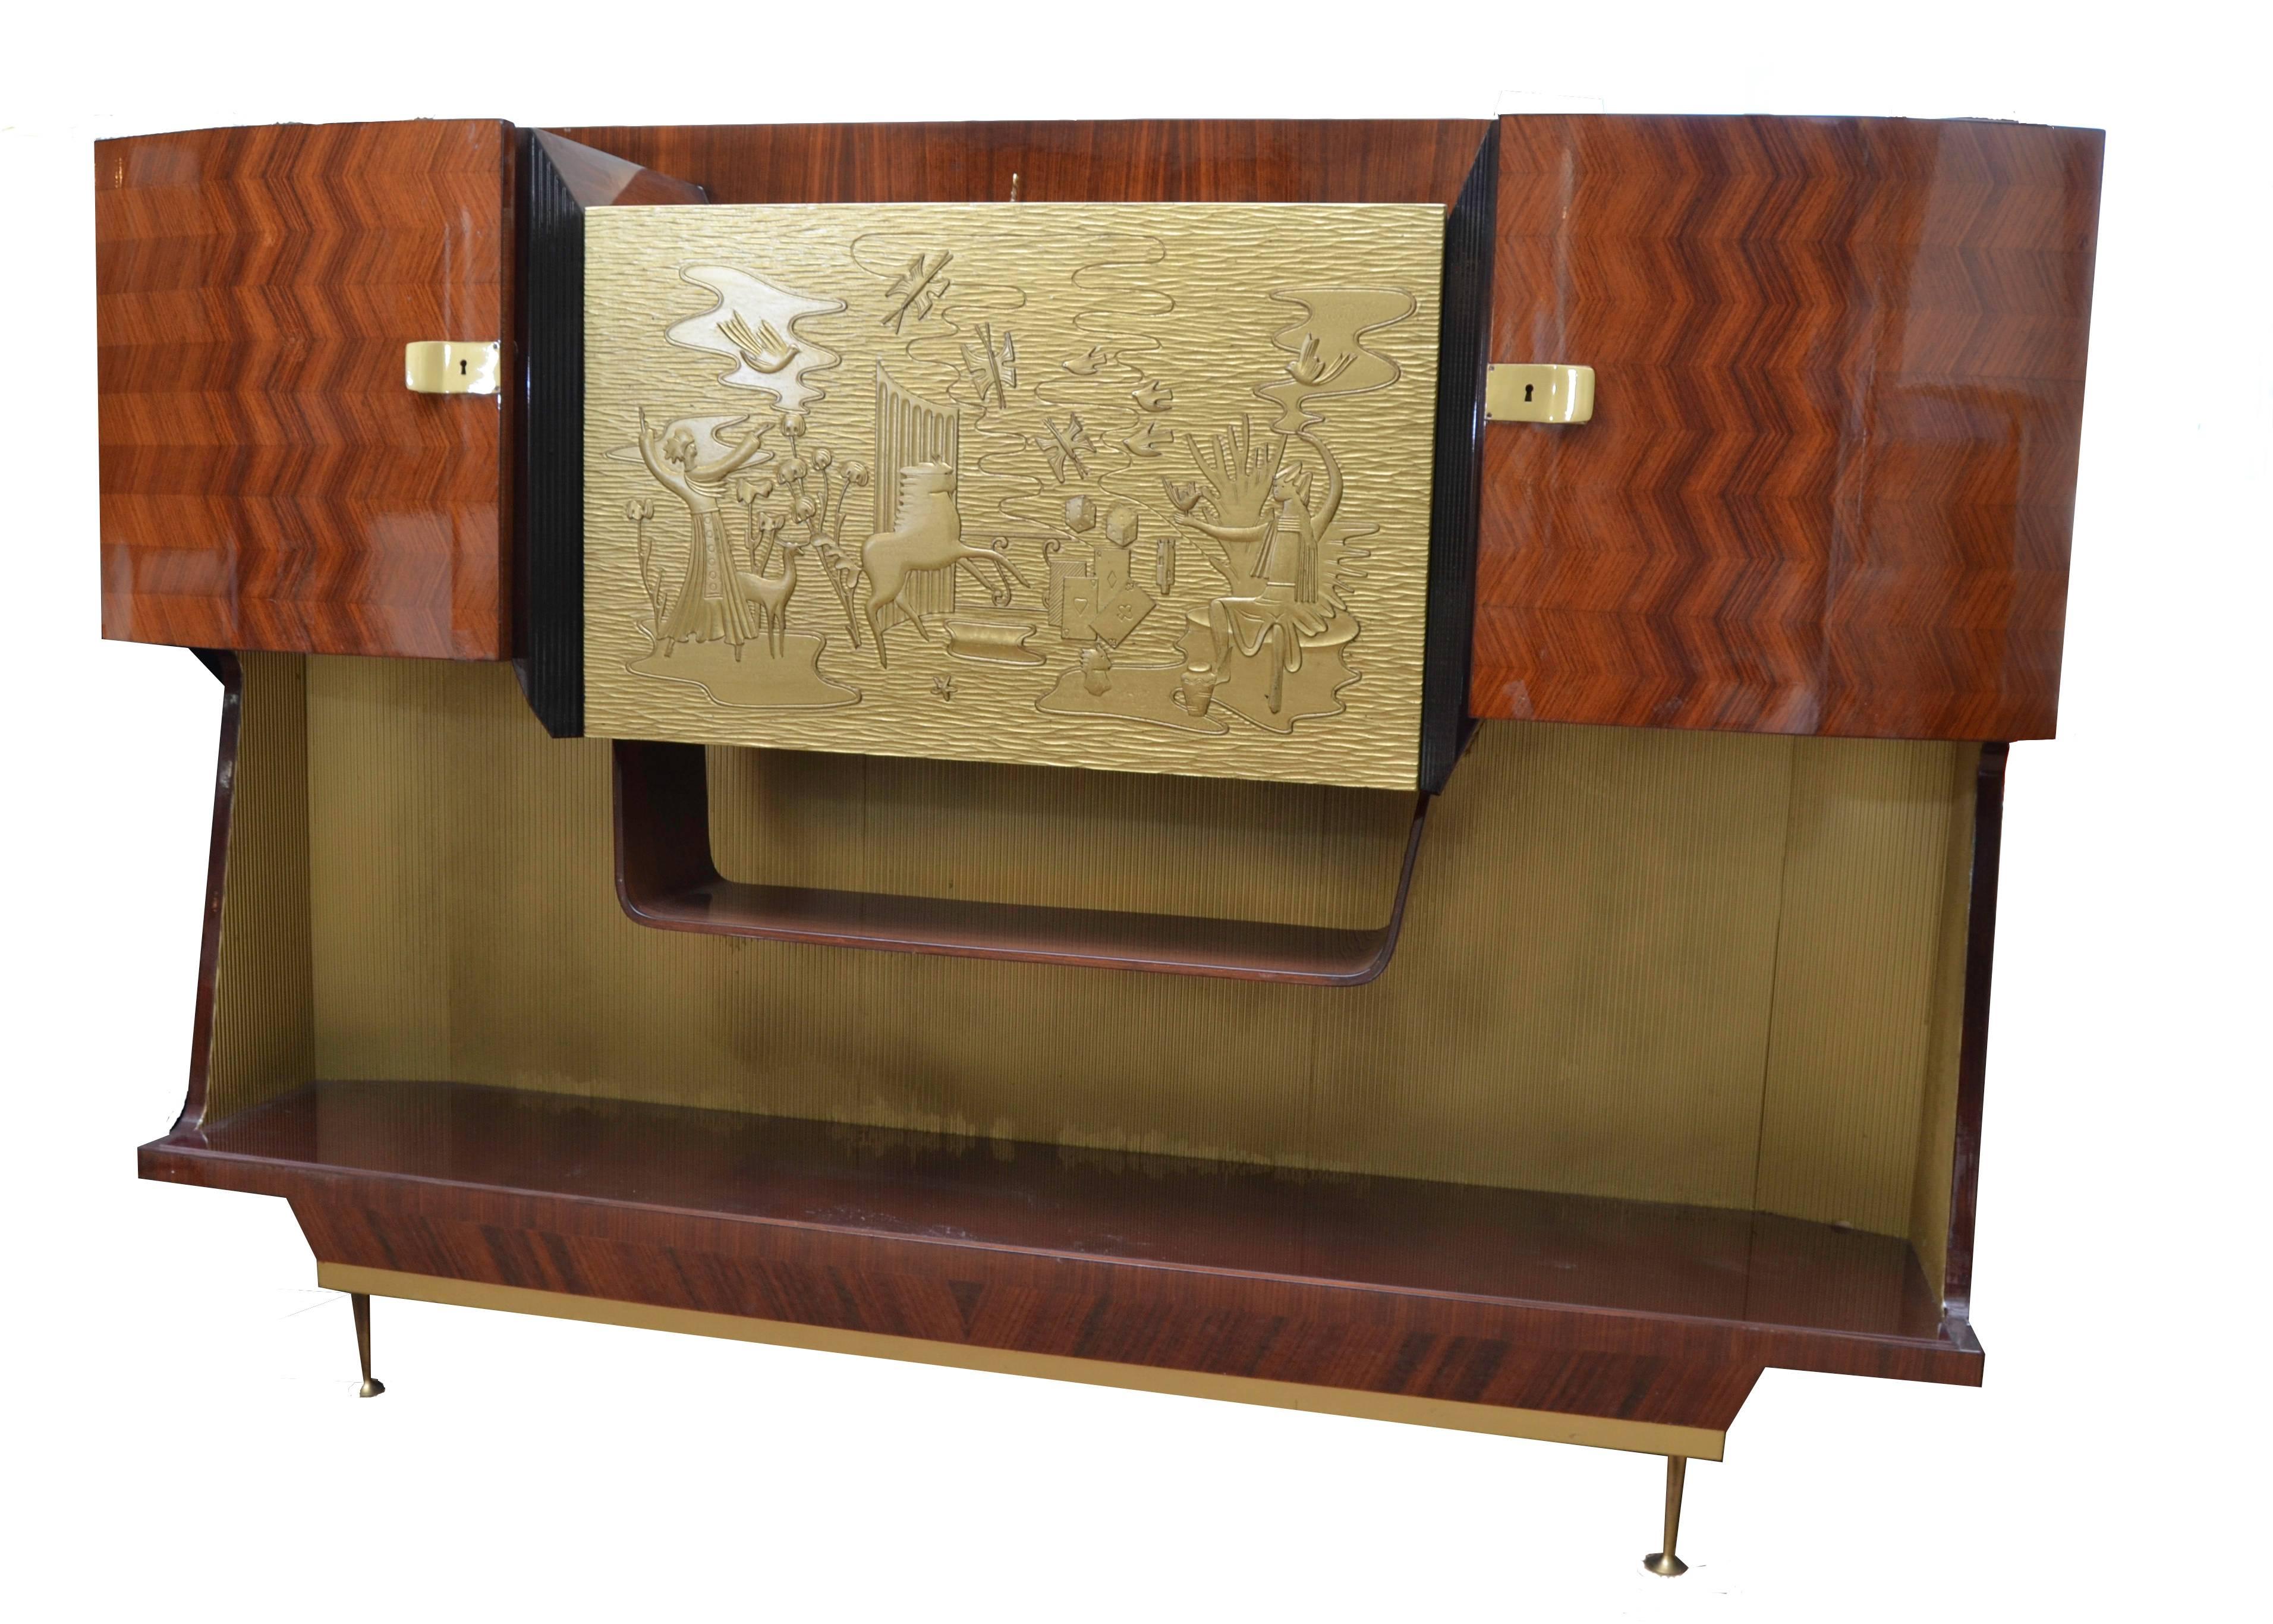 Italian dry bar from the 1940s.
Exceptional craftsmanship in wood and unique details in the hardware and keys. Gilded front panel flips forward to enable preparation of drinks. Ample storage for bottles and glasses.